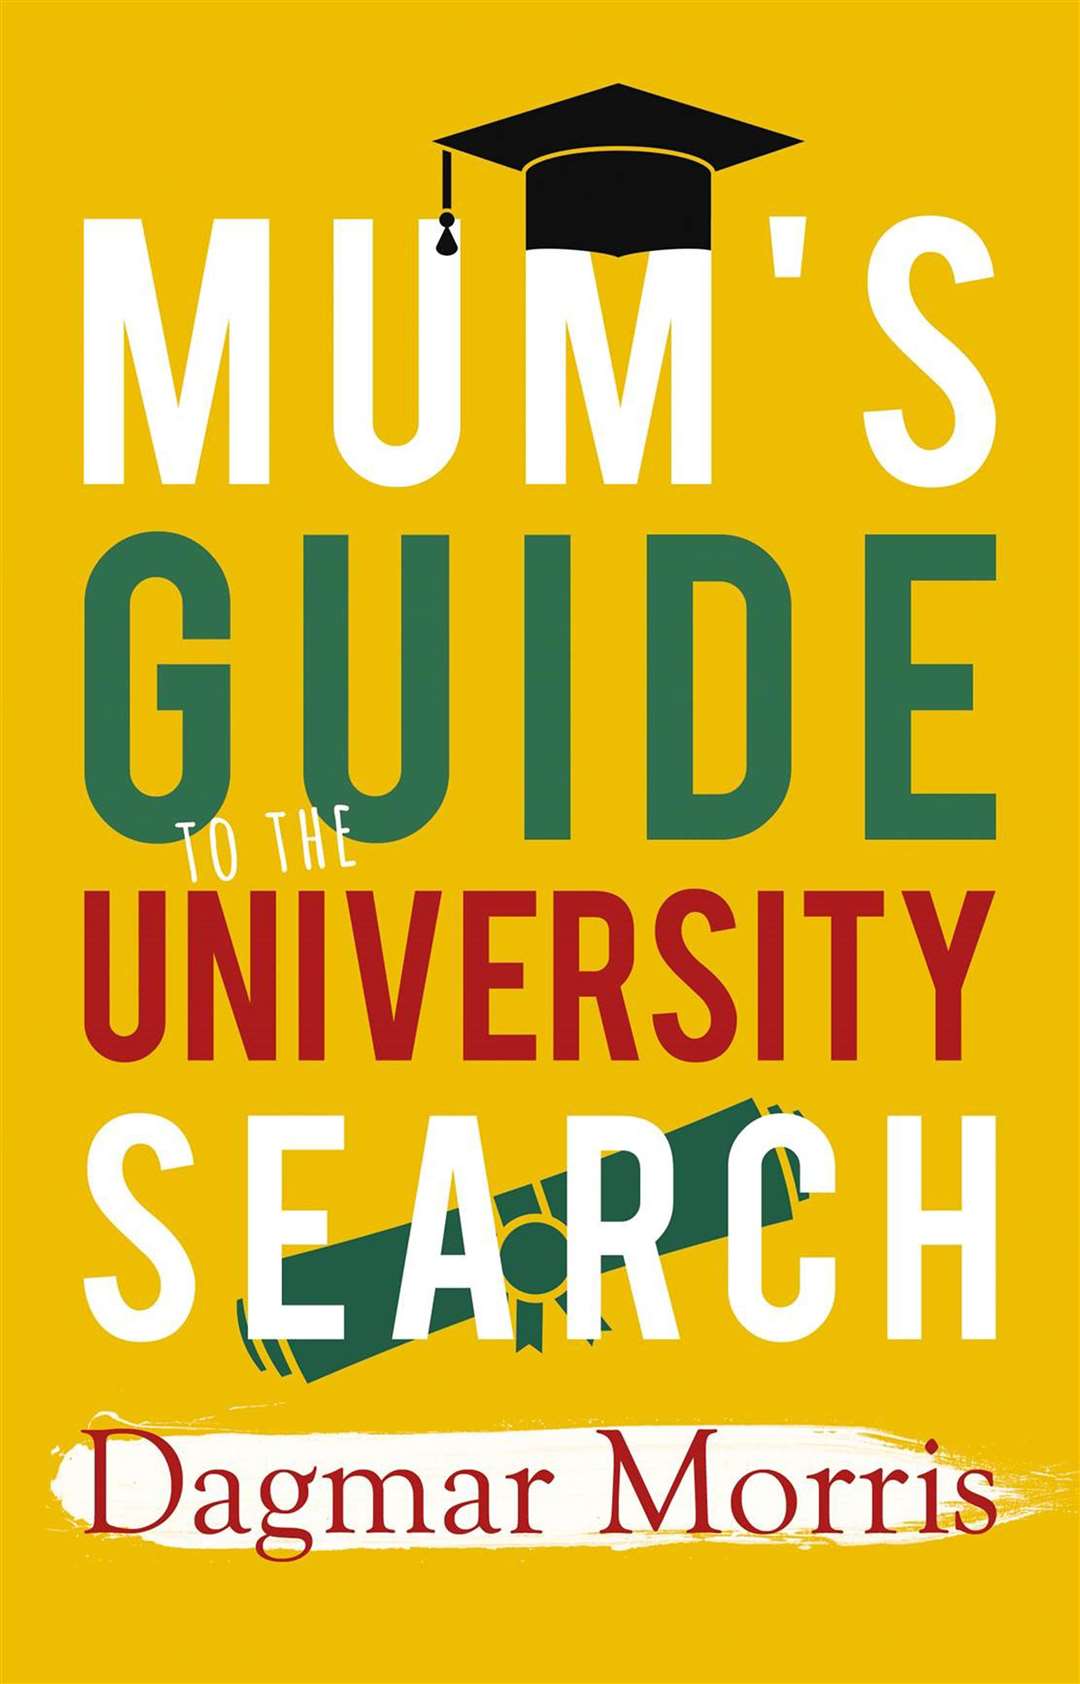 Mum's Guide to the University Search by Dagmar Morris